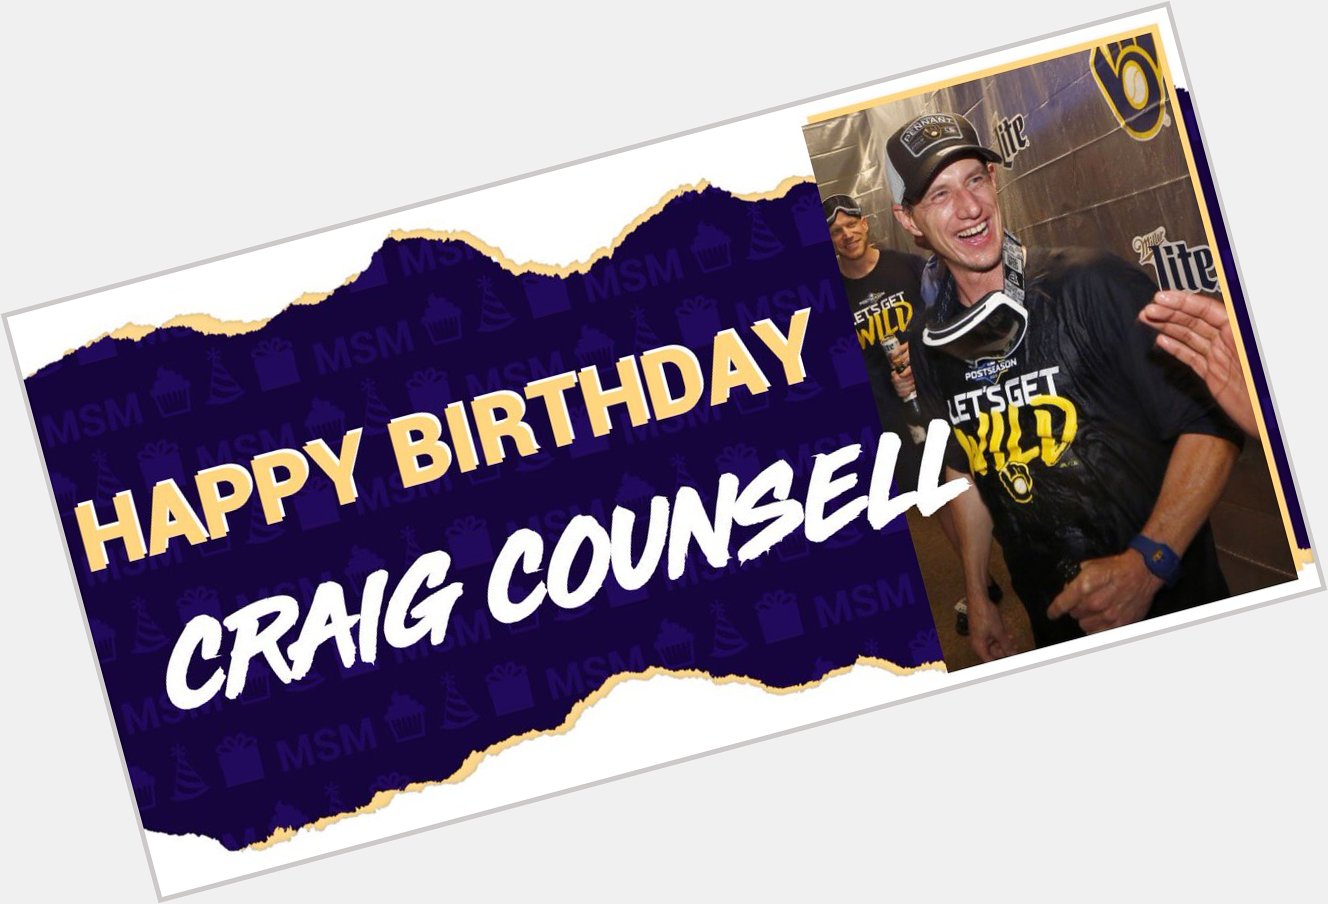 Happy 50th Birthday to fam and skip Craig Counsell! Have a great day Couns! 